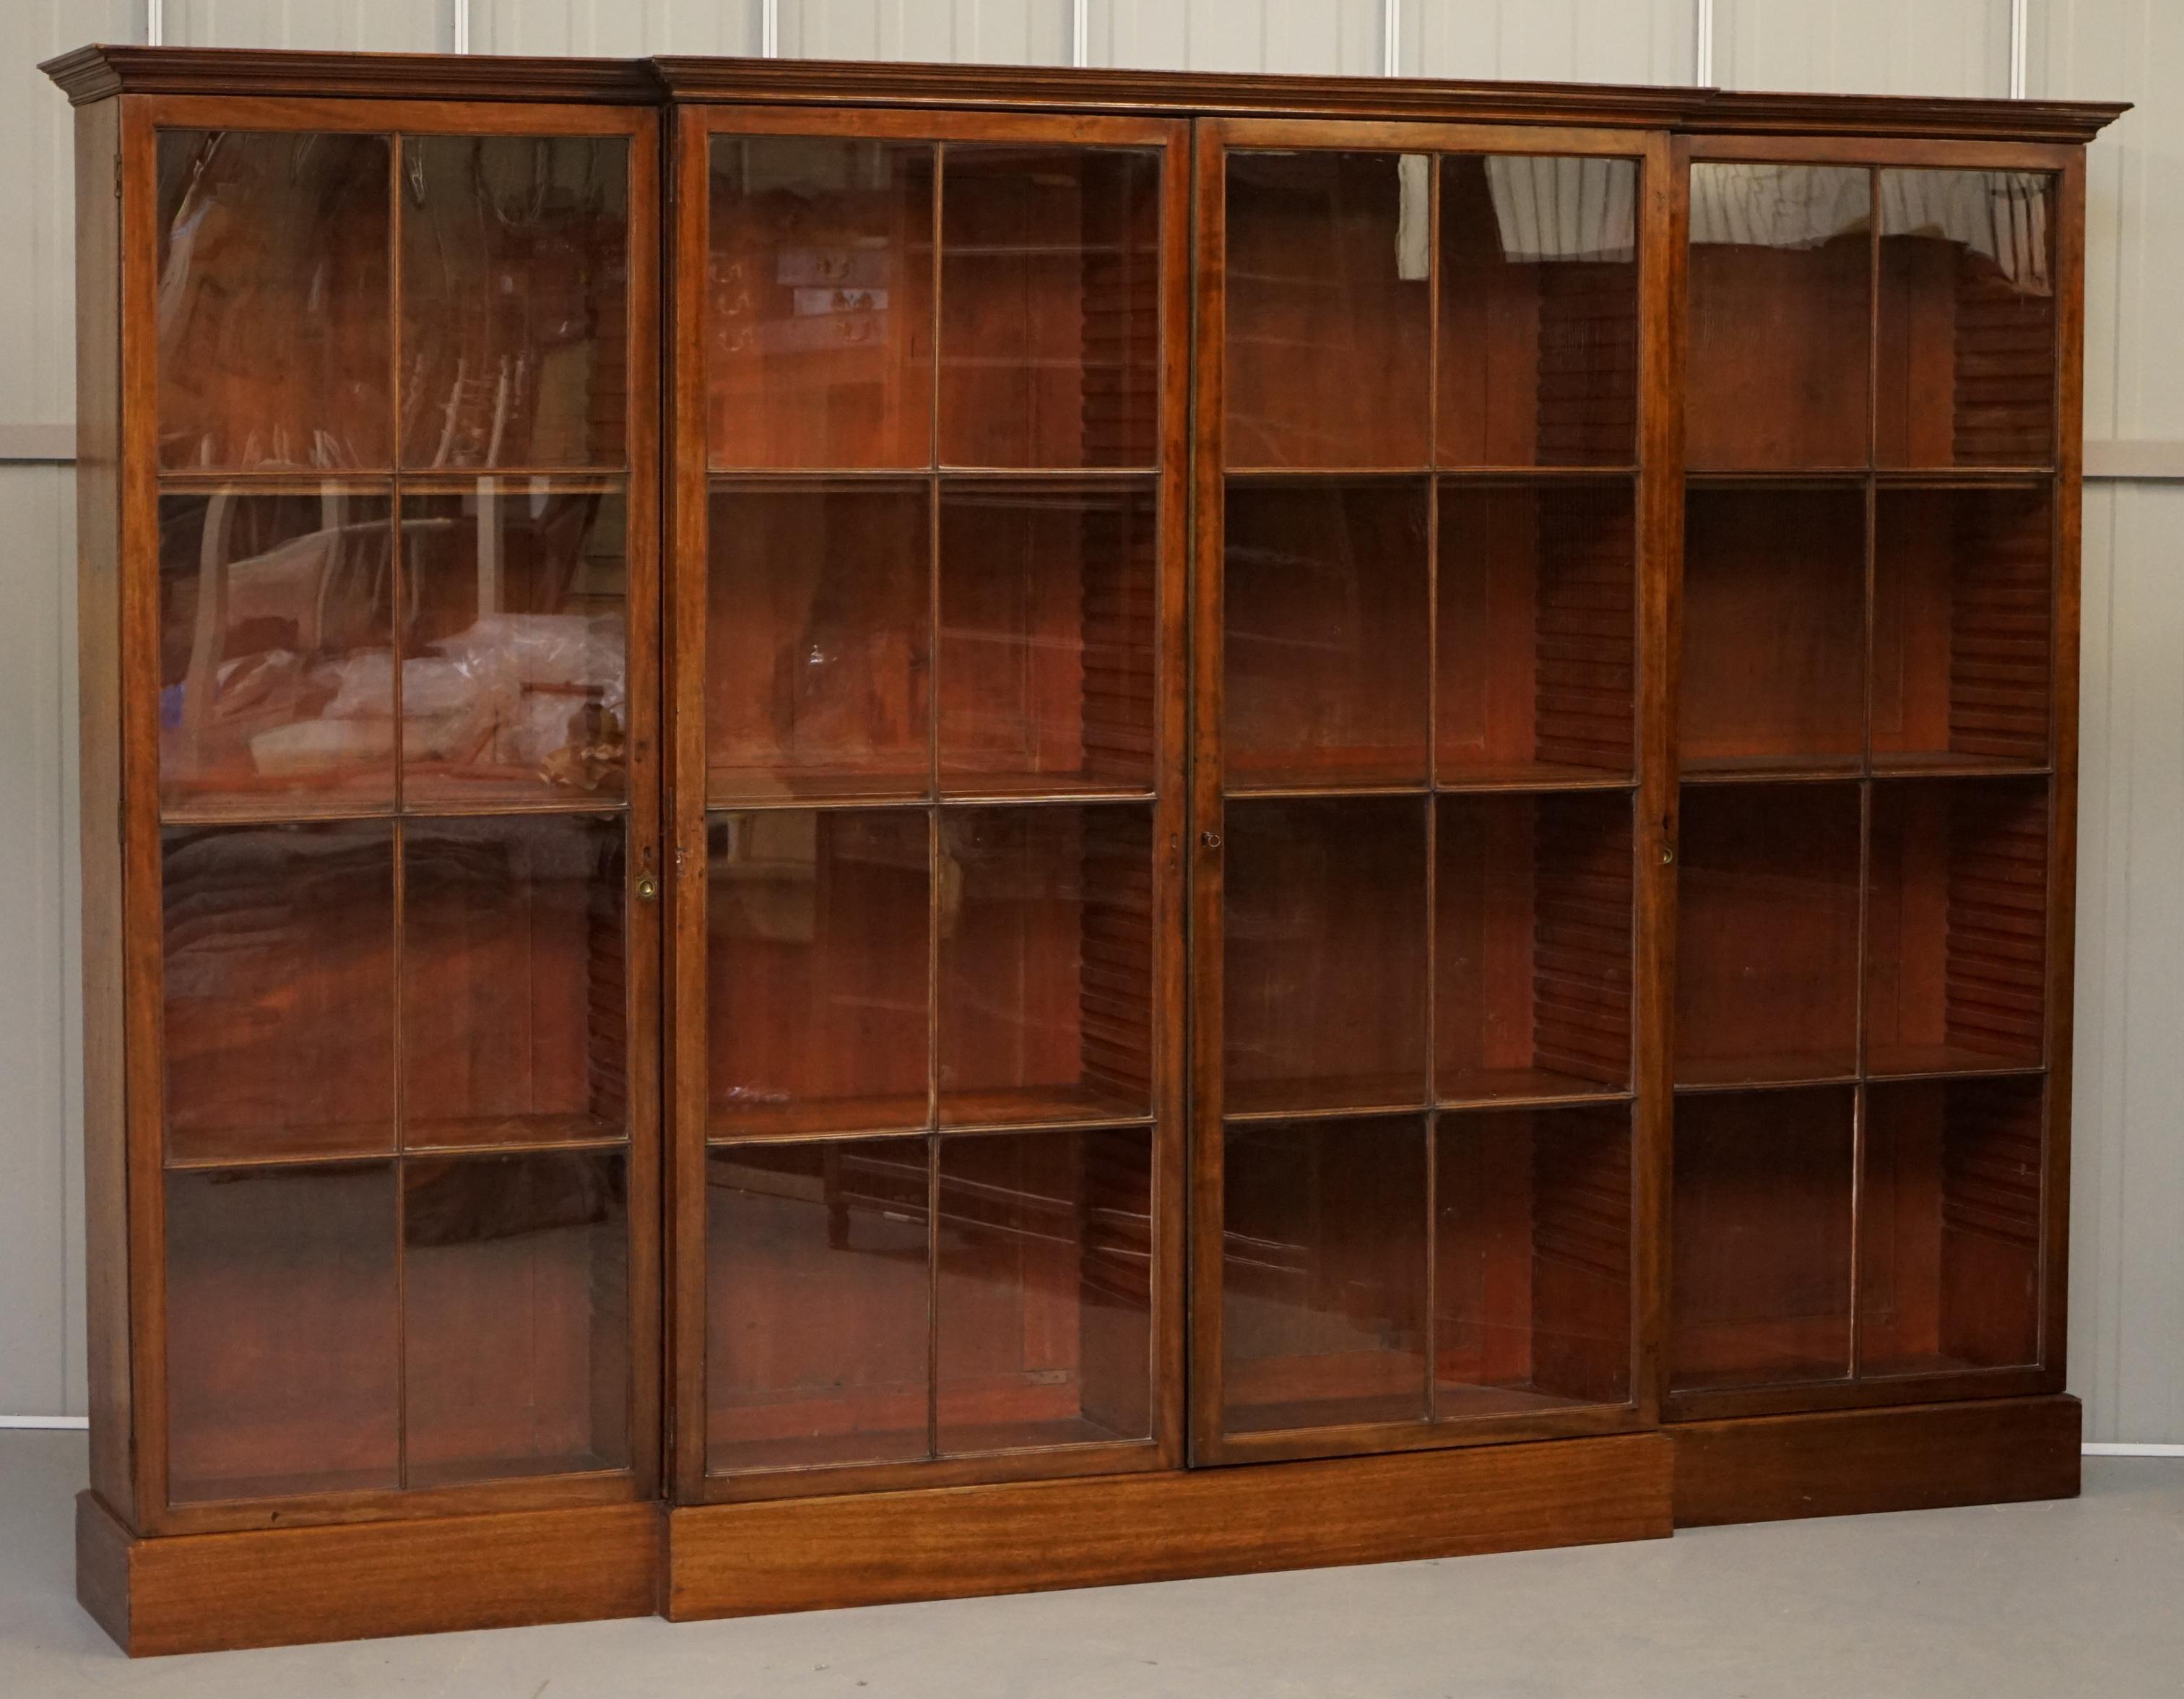 We are delighted to offer for sale this absolutely stunning restored large-scaled Victorian mahogany brake fronted bookcase.

A very good looking and large Library study bookcase, this piece can easily house an entire home library, every shelf is